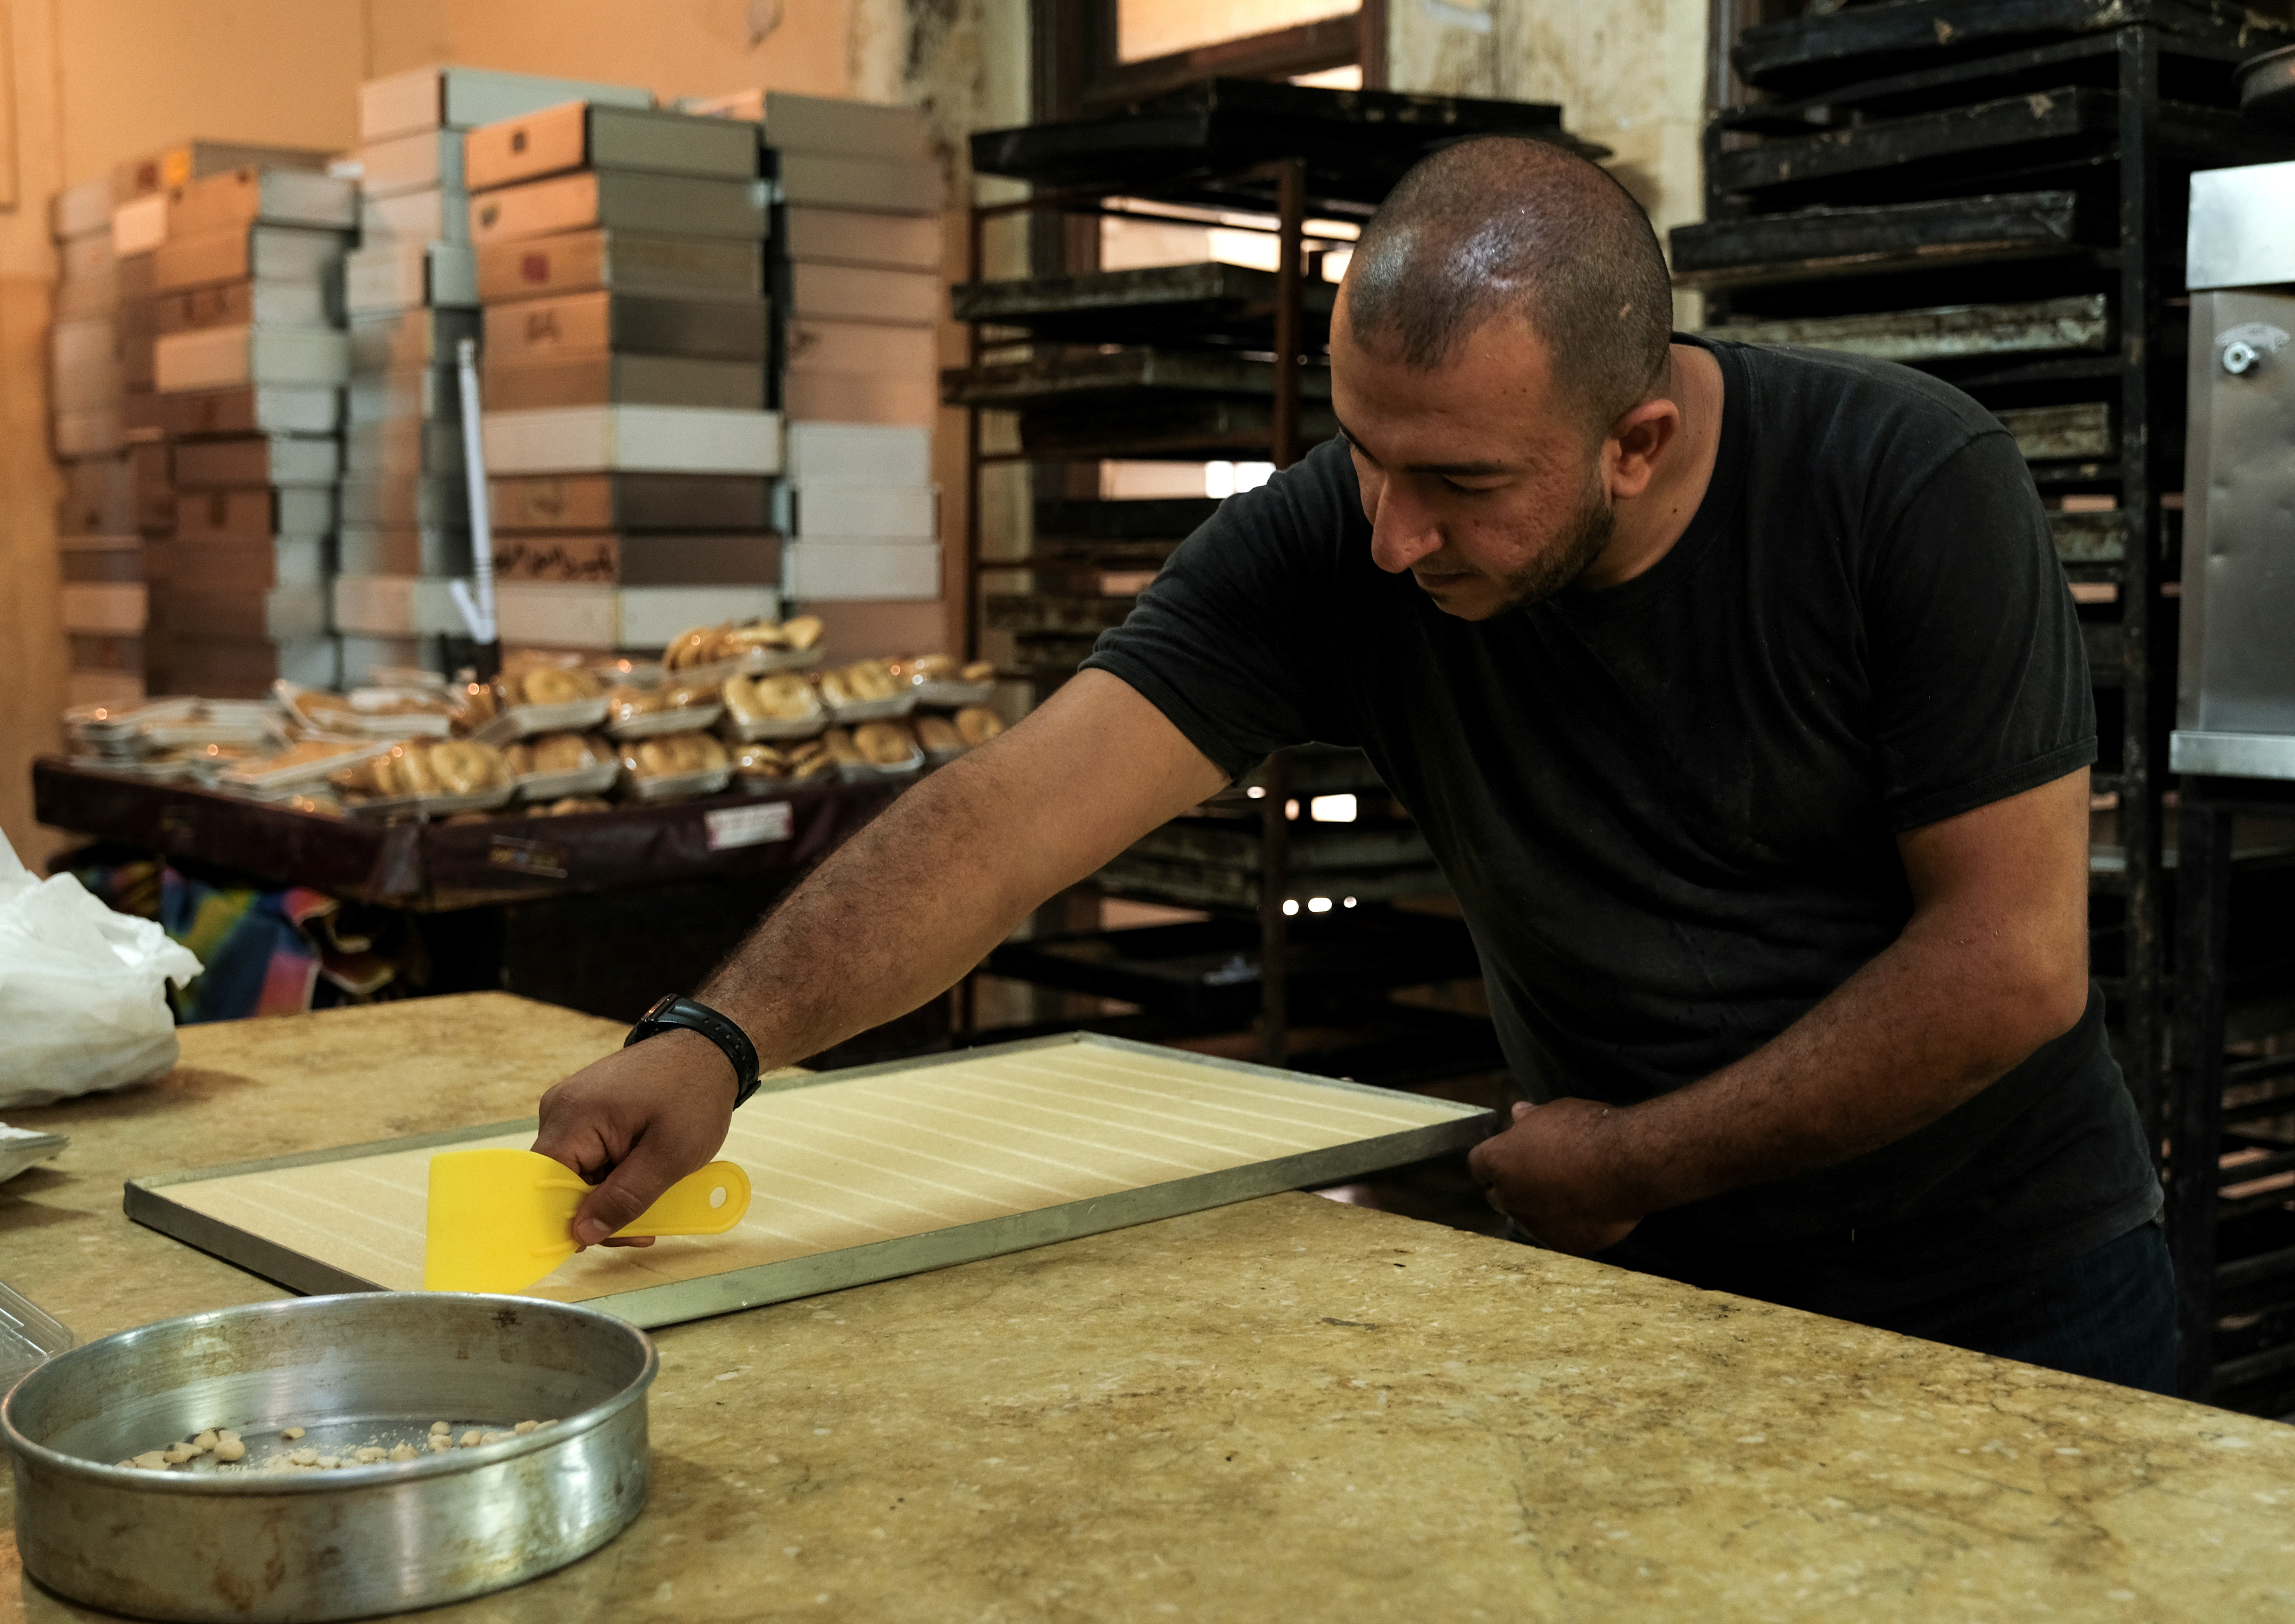 Taha Riz, 33, prepares traditional sweets inside a kitchen of a bakery in Tripoli